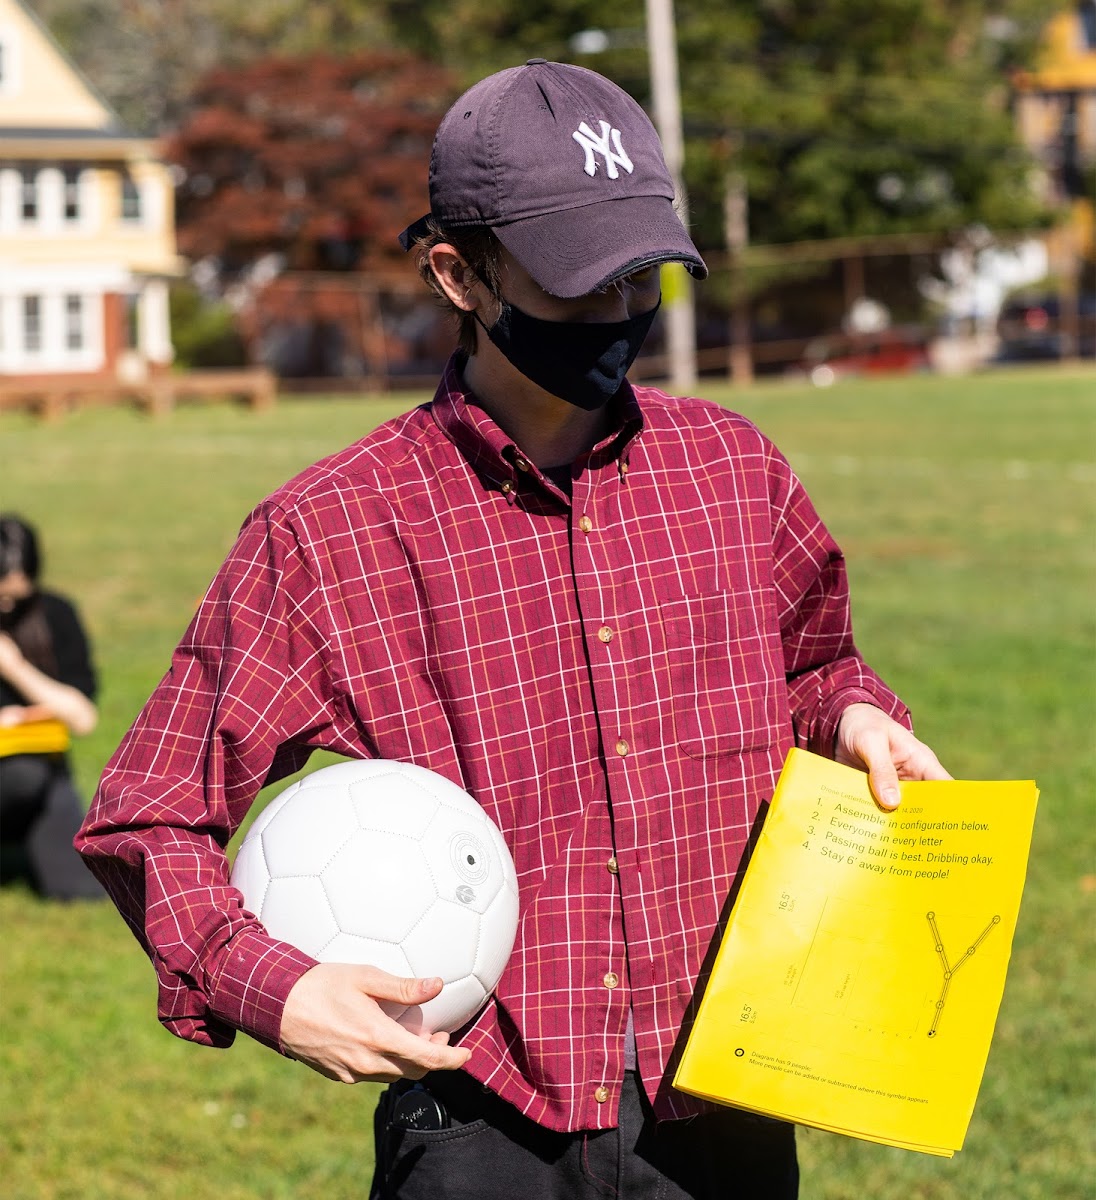 Masked sophomore Max O’Connor 23 GD holds a soccer ball and a letter Y on paper in a field